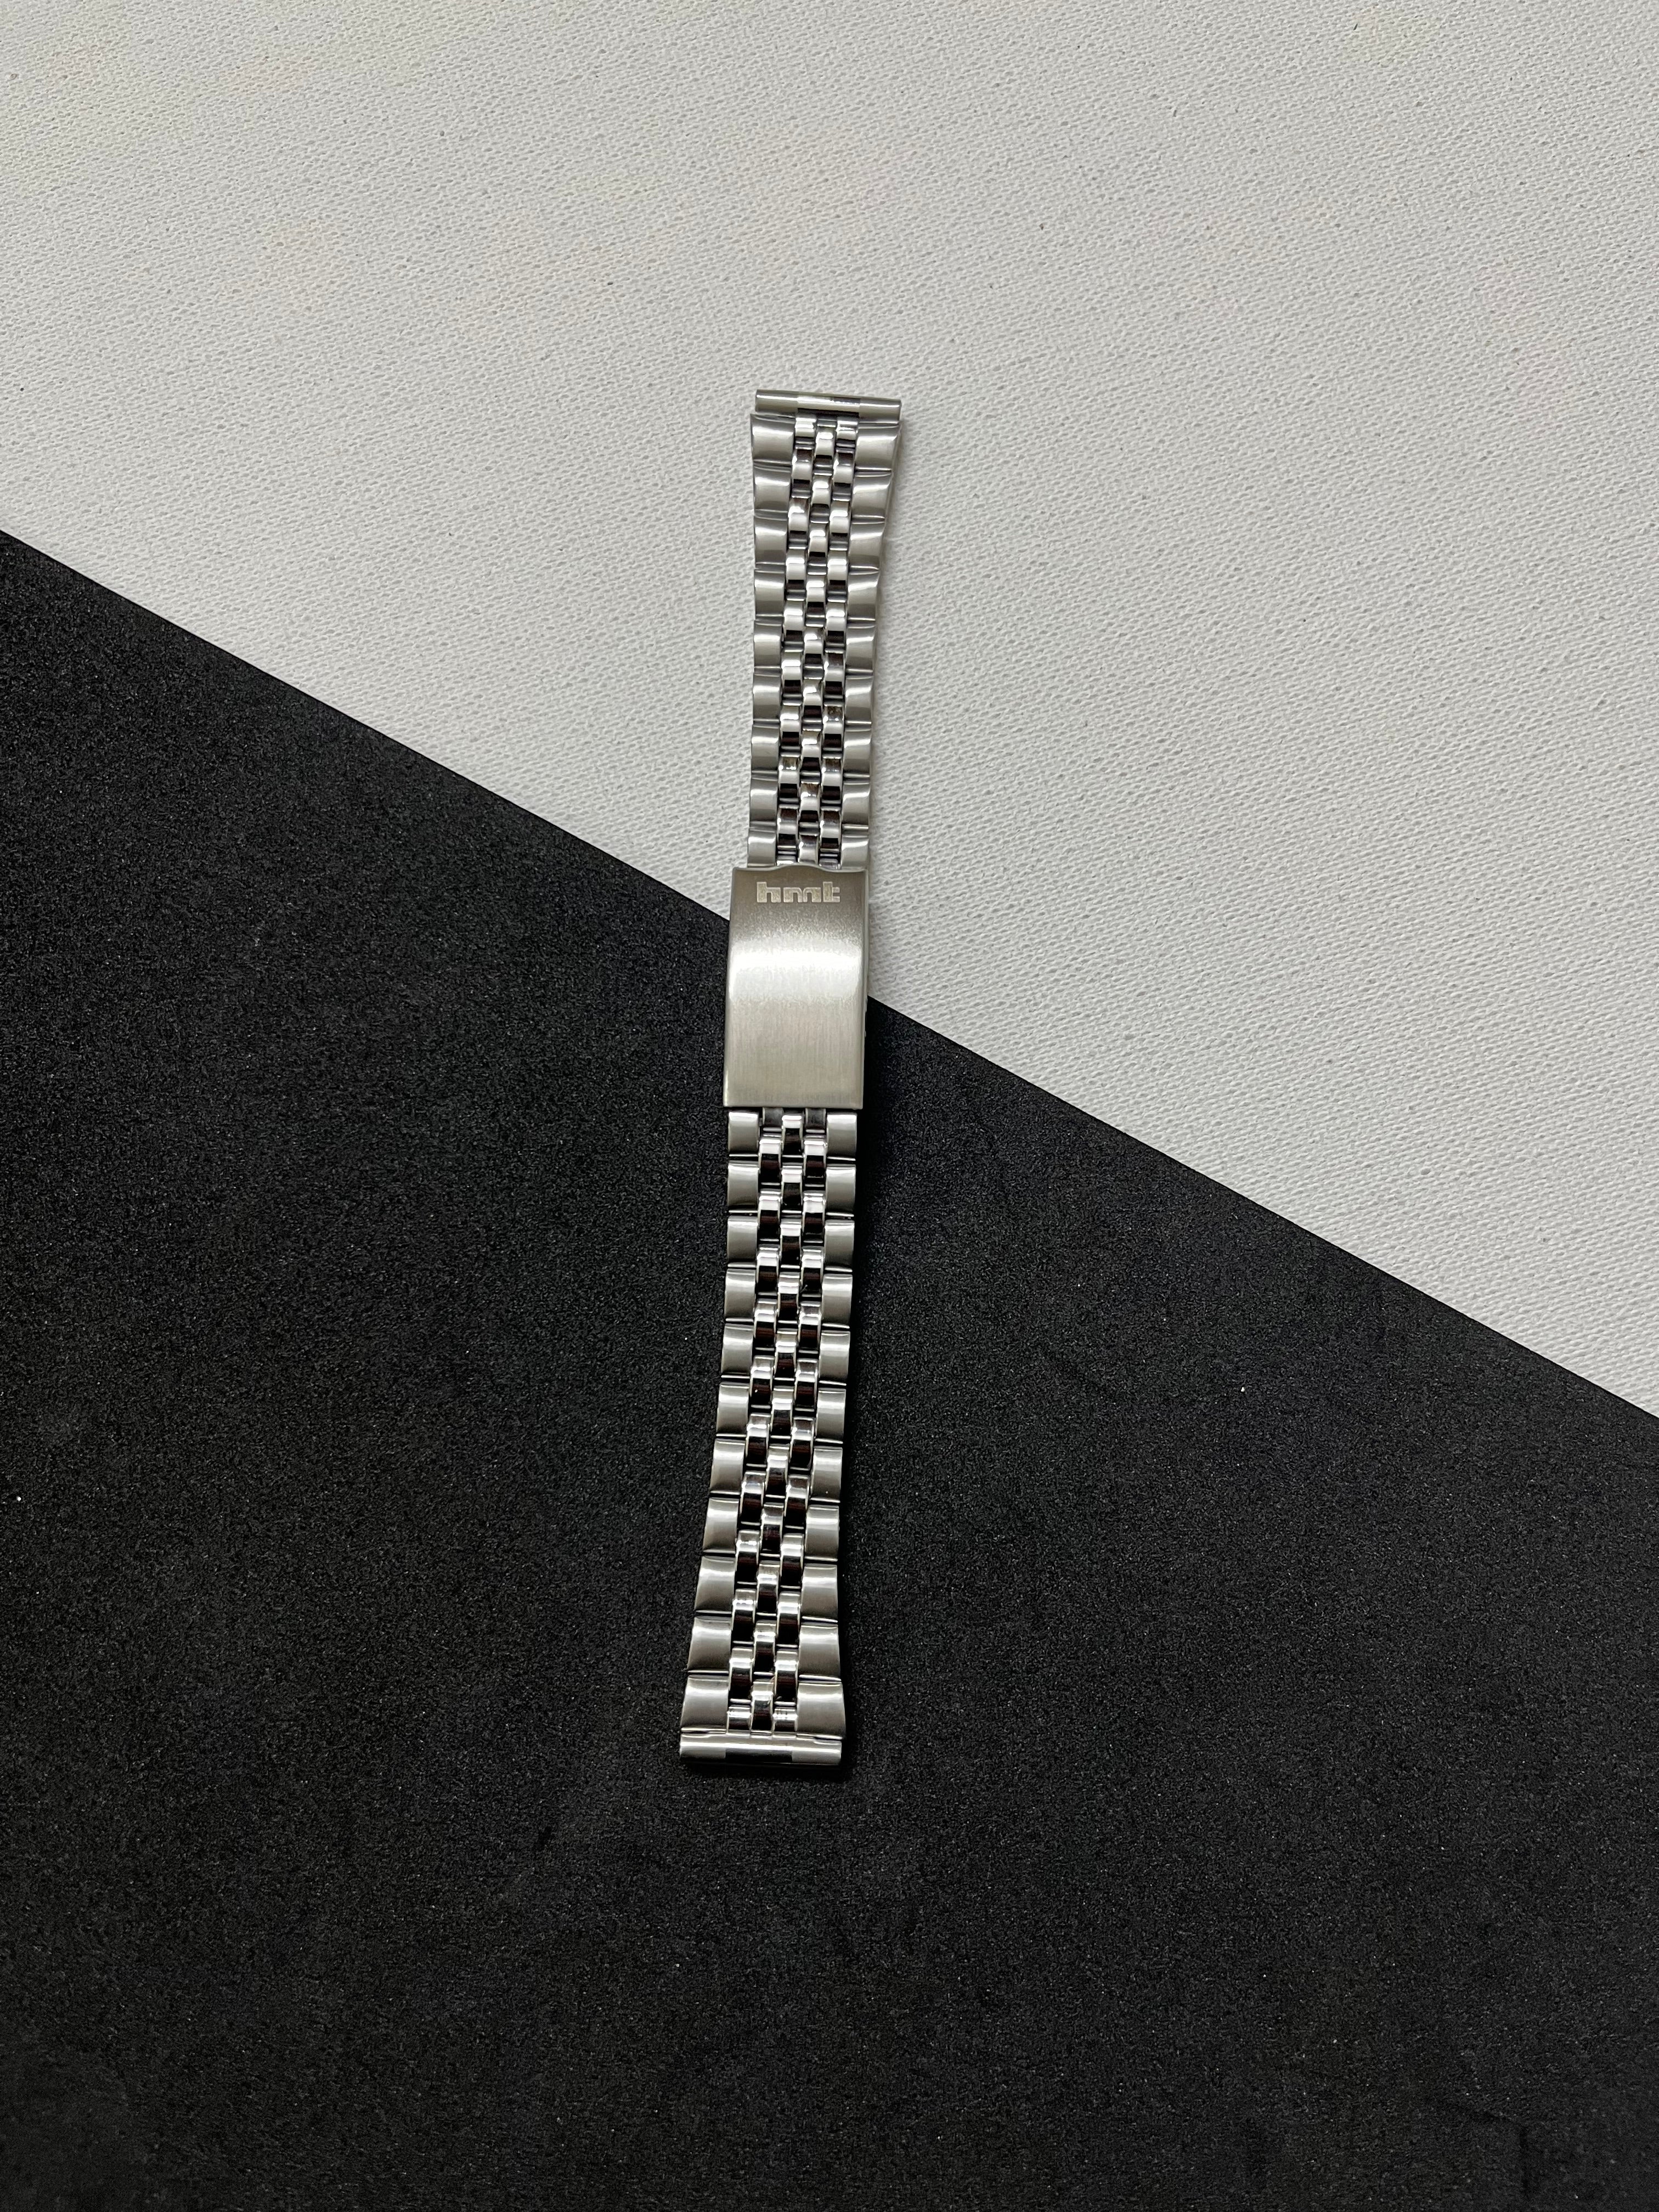 OYSTER 316L SOLID Stainless Steel Watch Bracelet Strap 18mm 20mm 22mm 24mm  £15.95 - PicClick UK